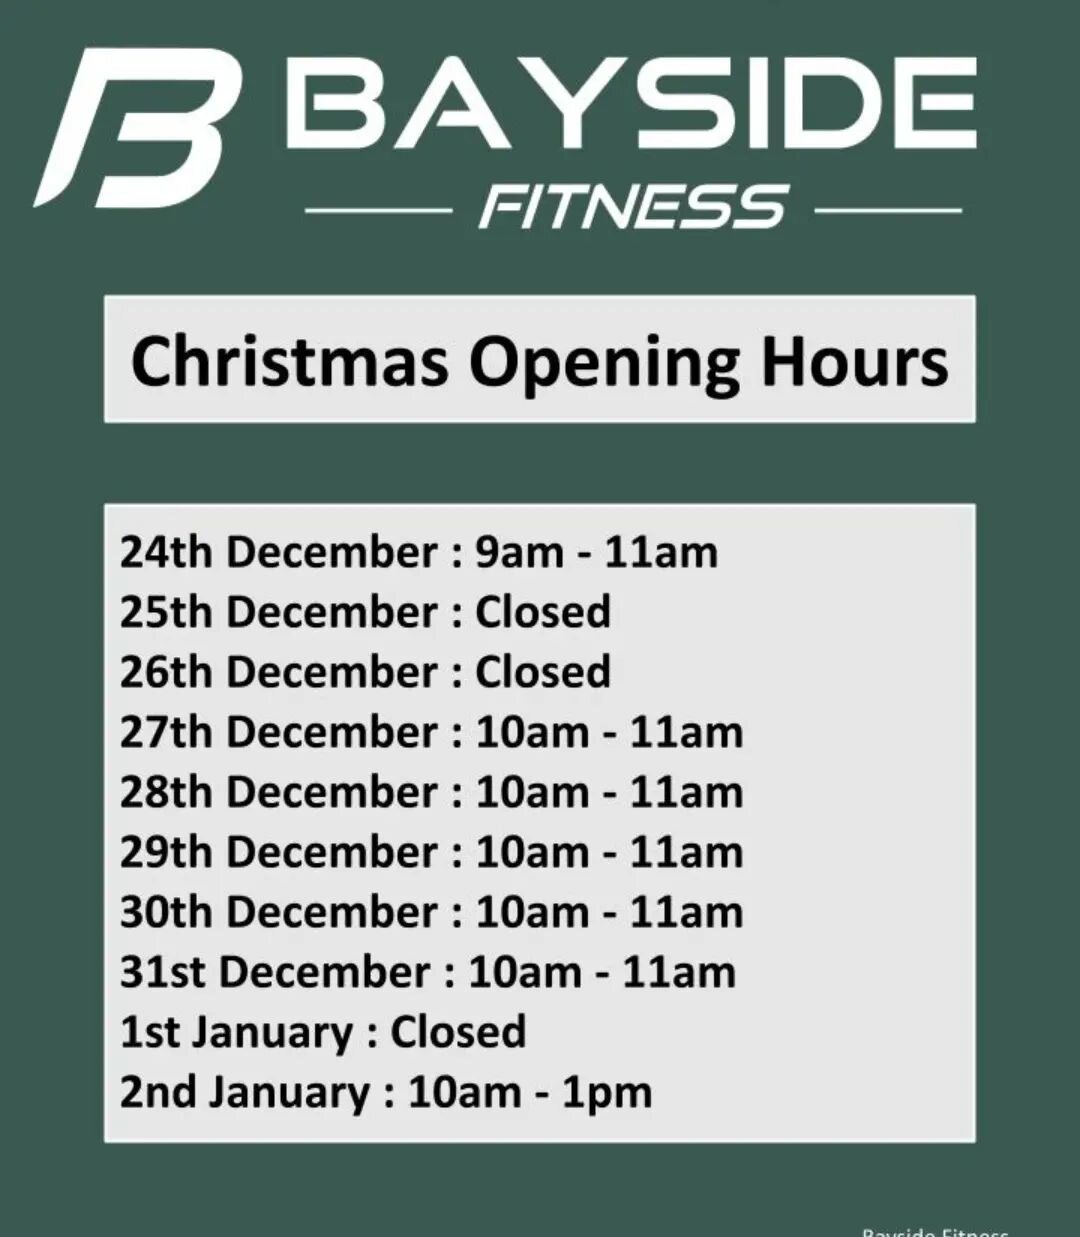 Christmas Opening Hours 🌲
Check your schedule to book into classes 🖤